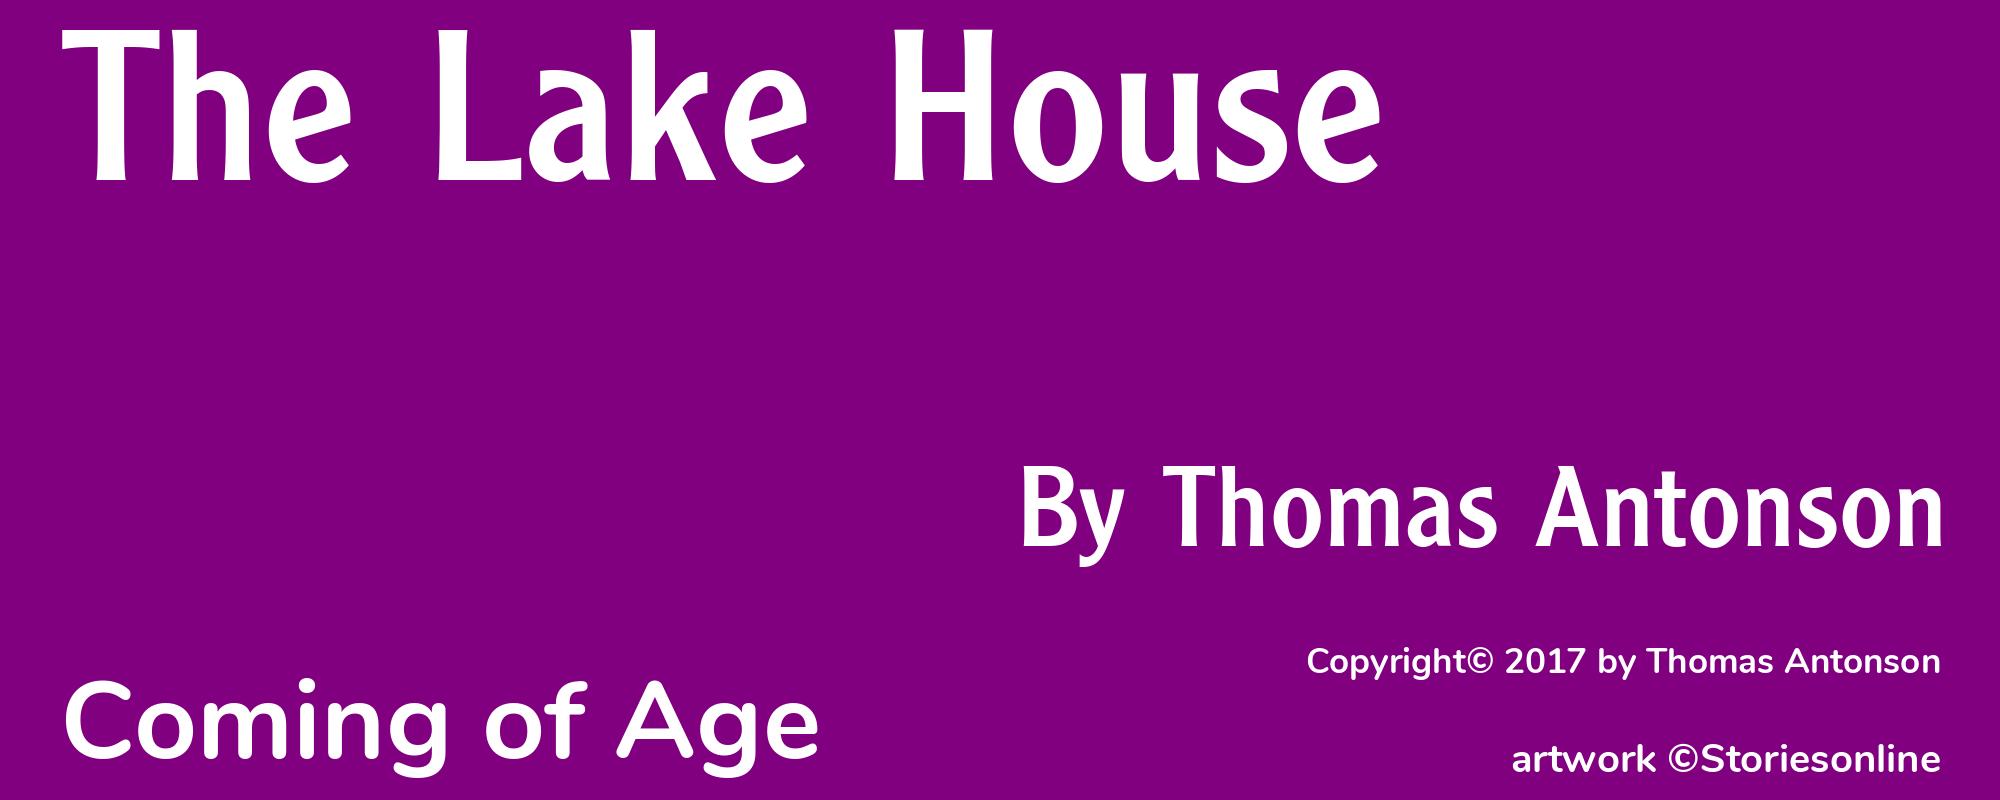 The Lake House - Cover